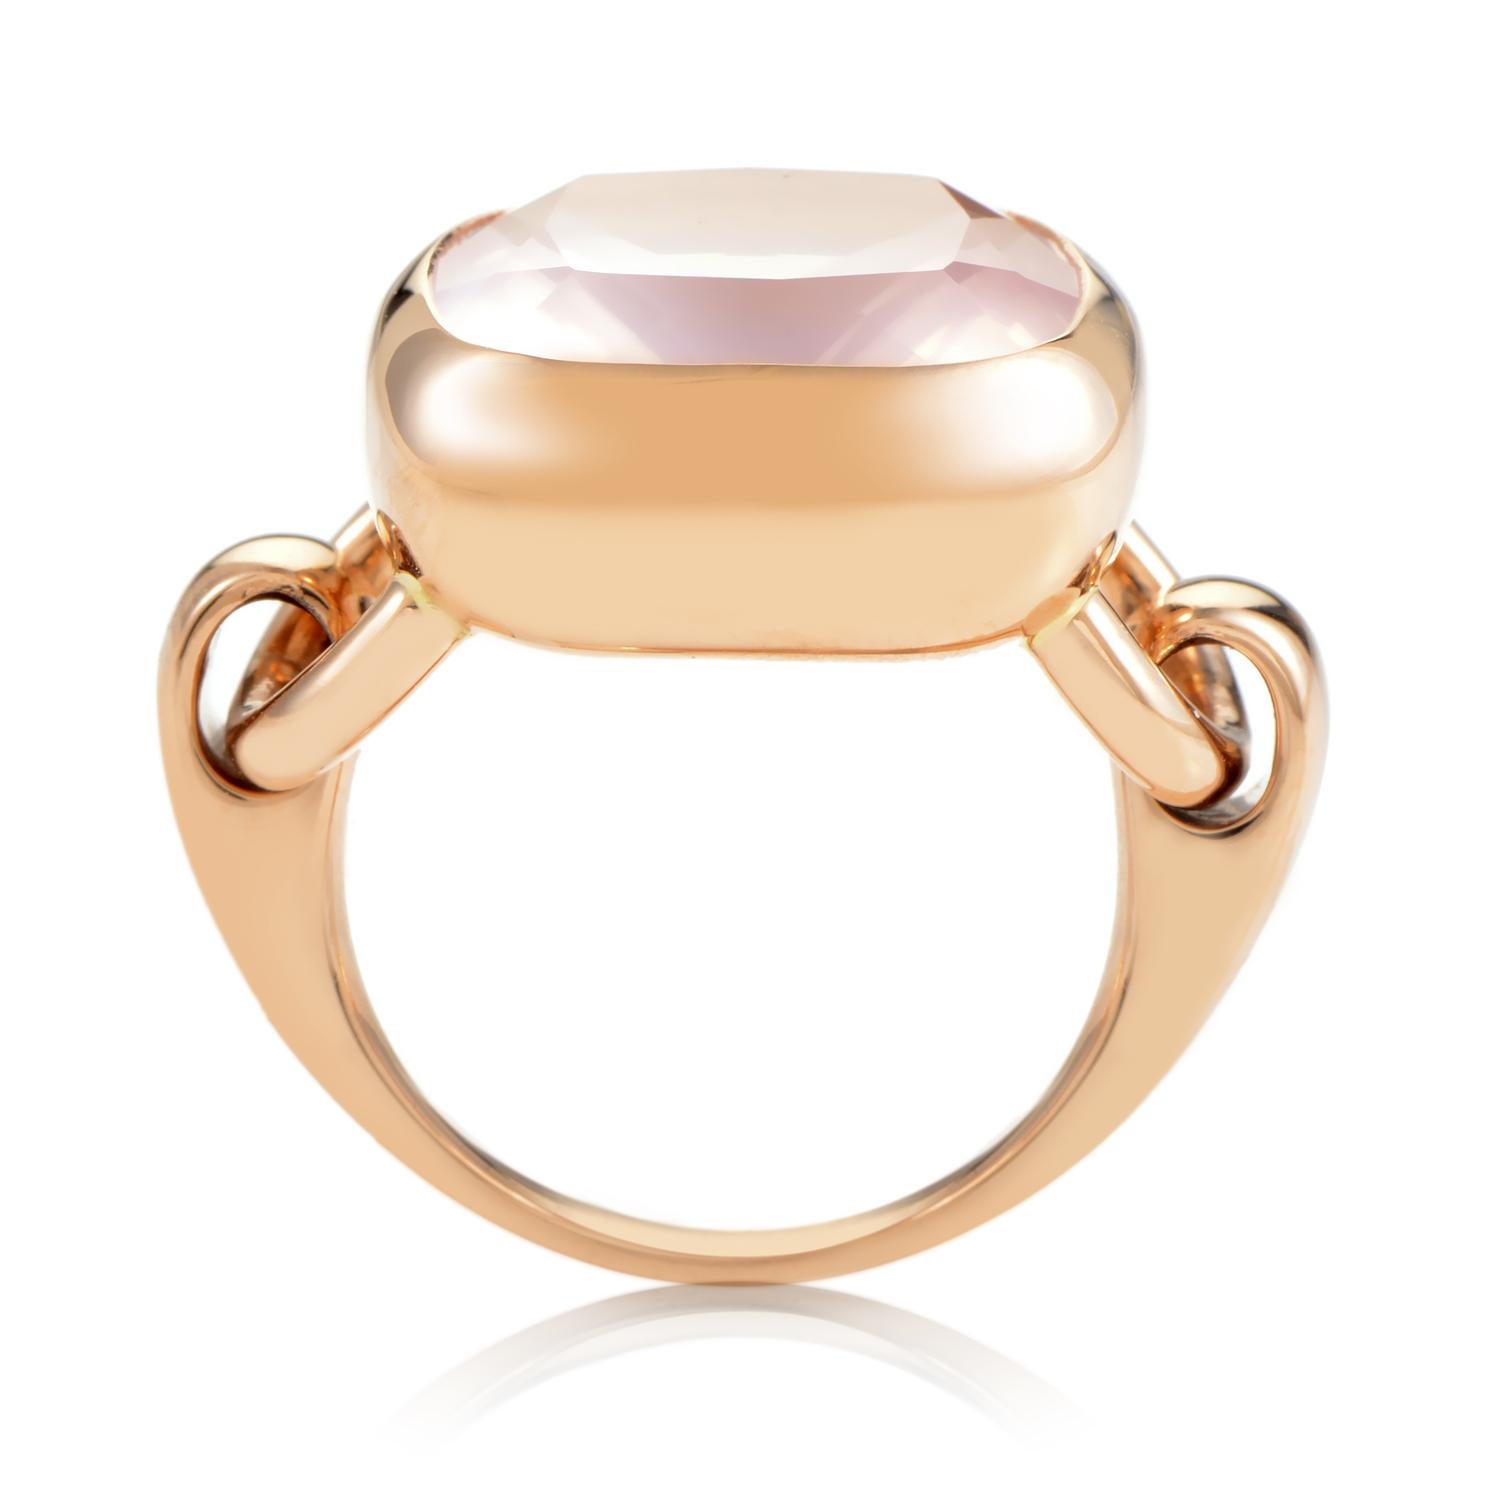 18K Rose Gold spills upward with perfection, rolling into twin loops where the band meets the crown. A grand setting of Pink Quartz steals the show atop the plateau of precious metal. This lovely ring design from Poiray comes with manufacturer's box